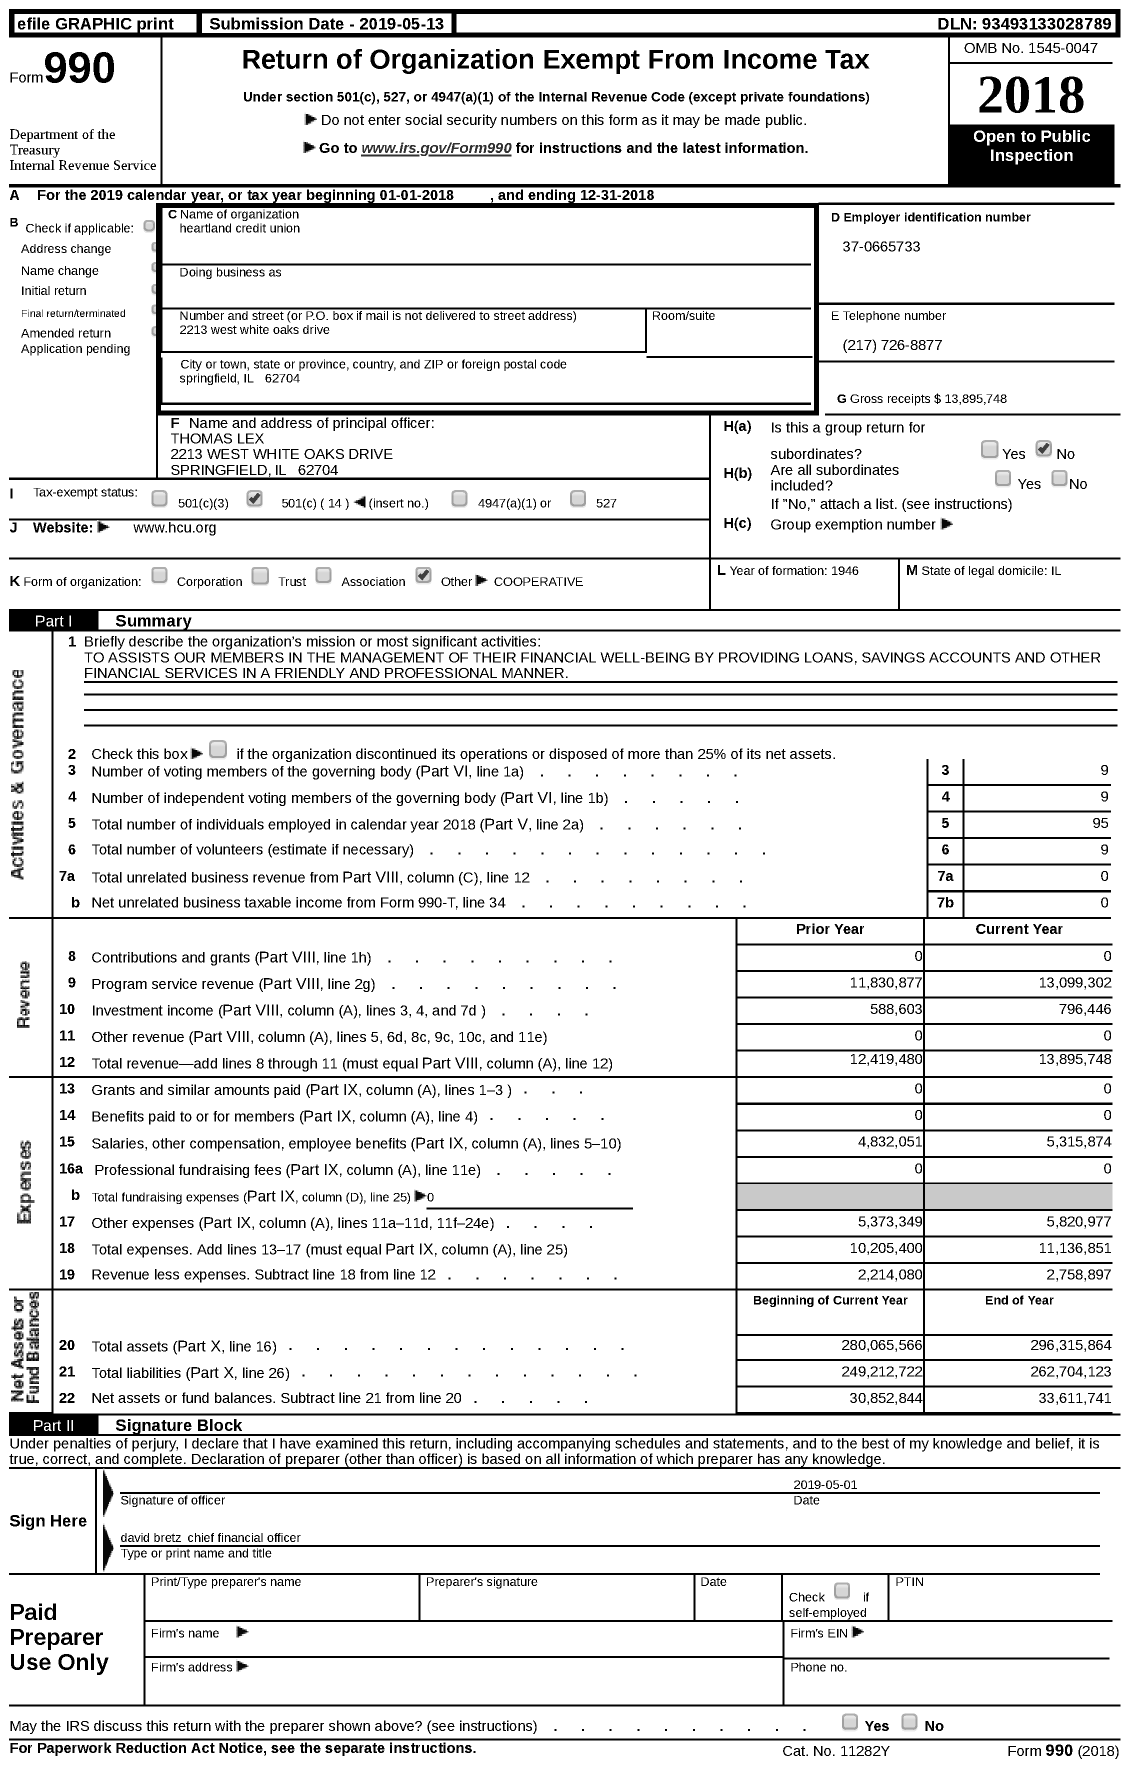 Image of first page of 2018 Form 990 for heartland credit union